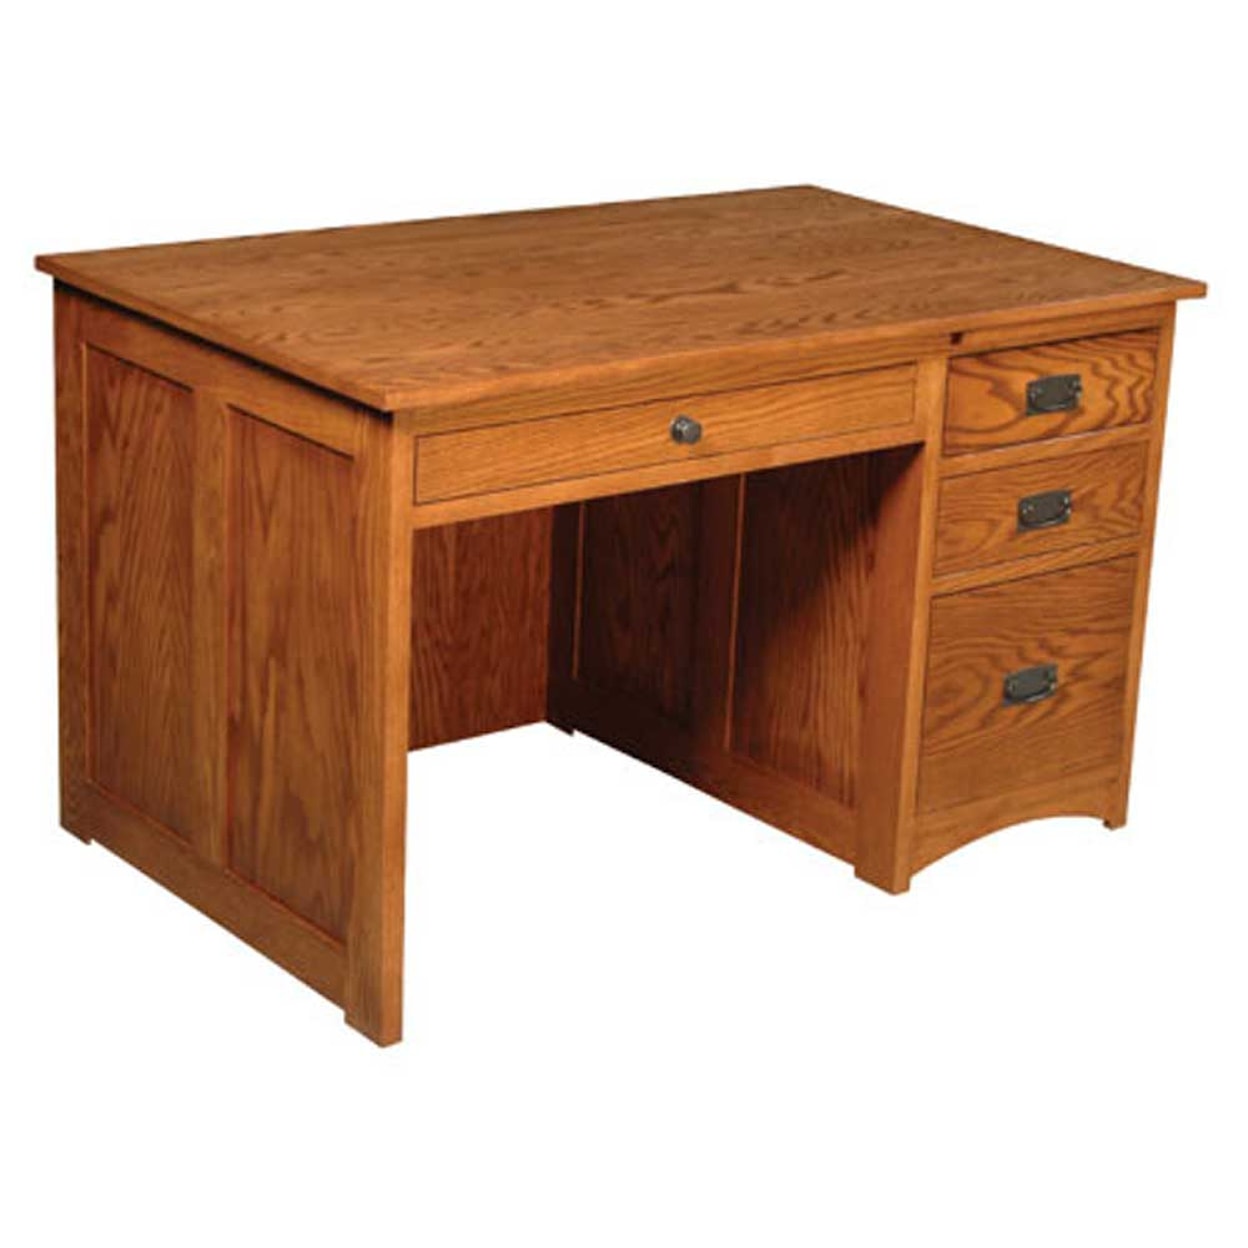 Simply Amish Prairie Mission Flat Top Desk